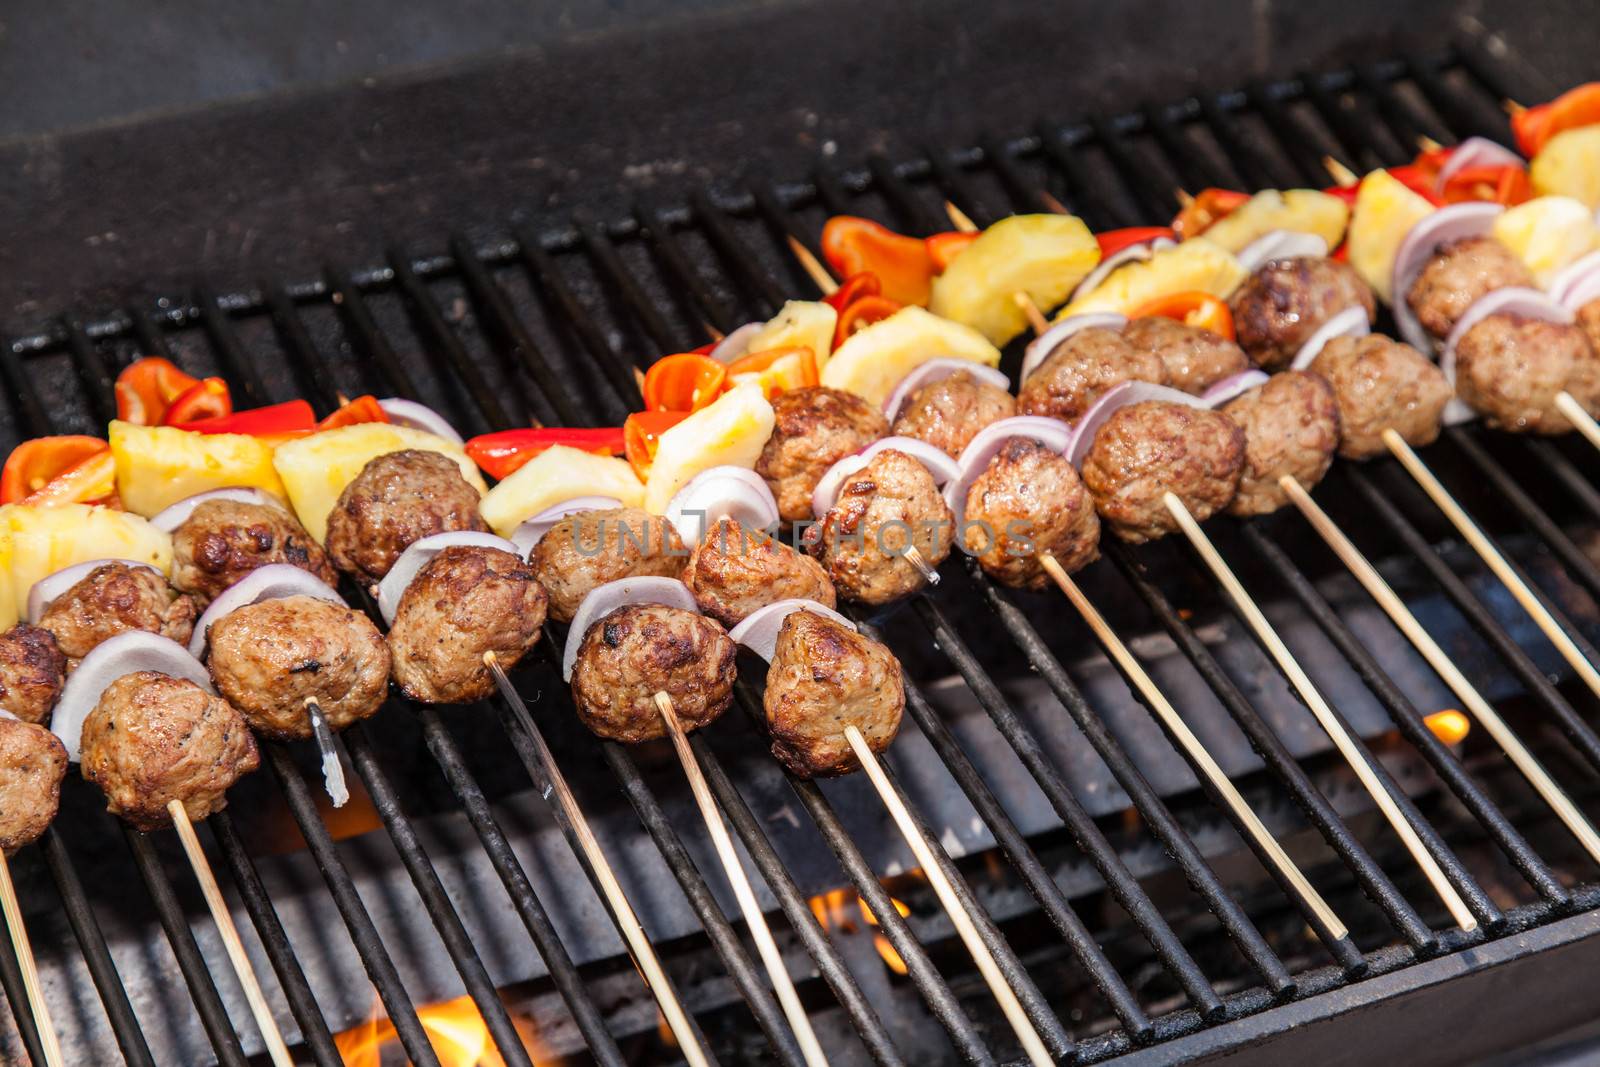 Grilled Meatball and Pineapple Kebabs by melastmohican